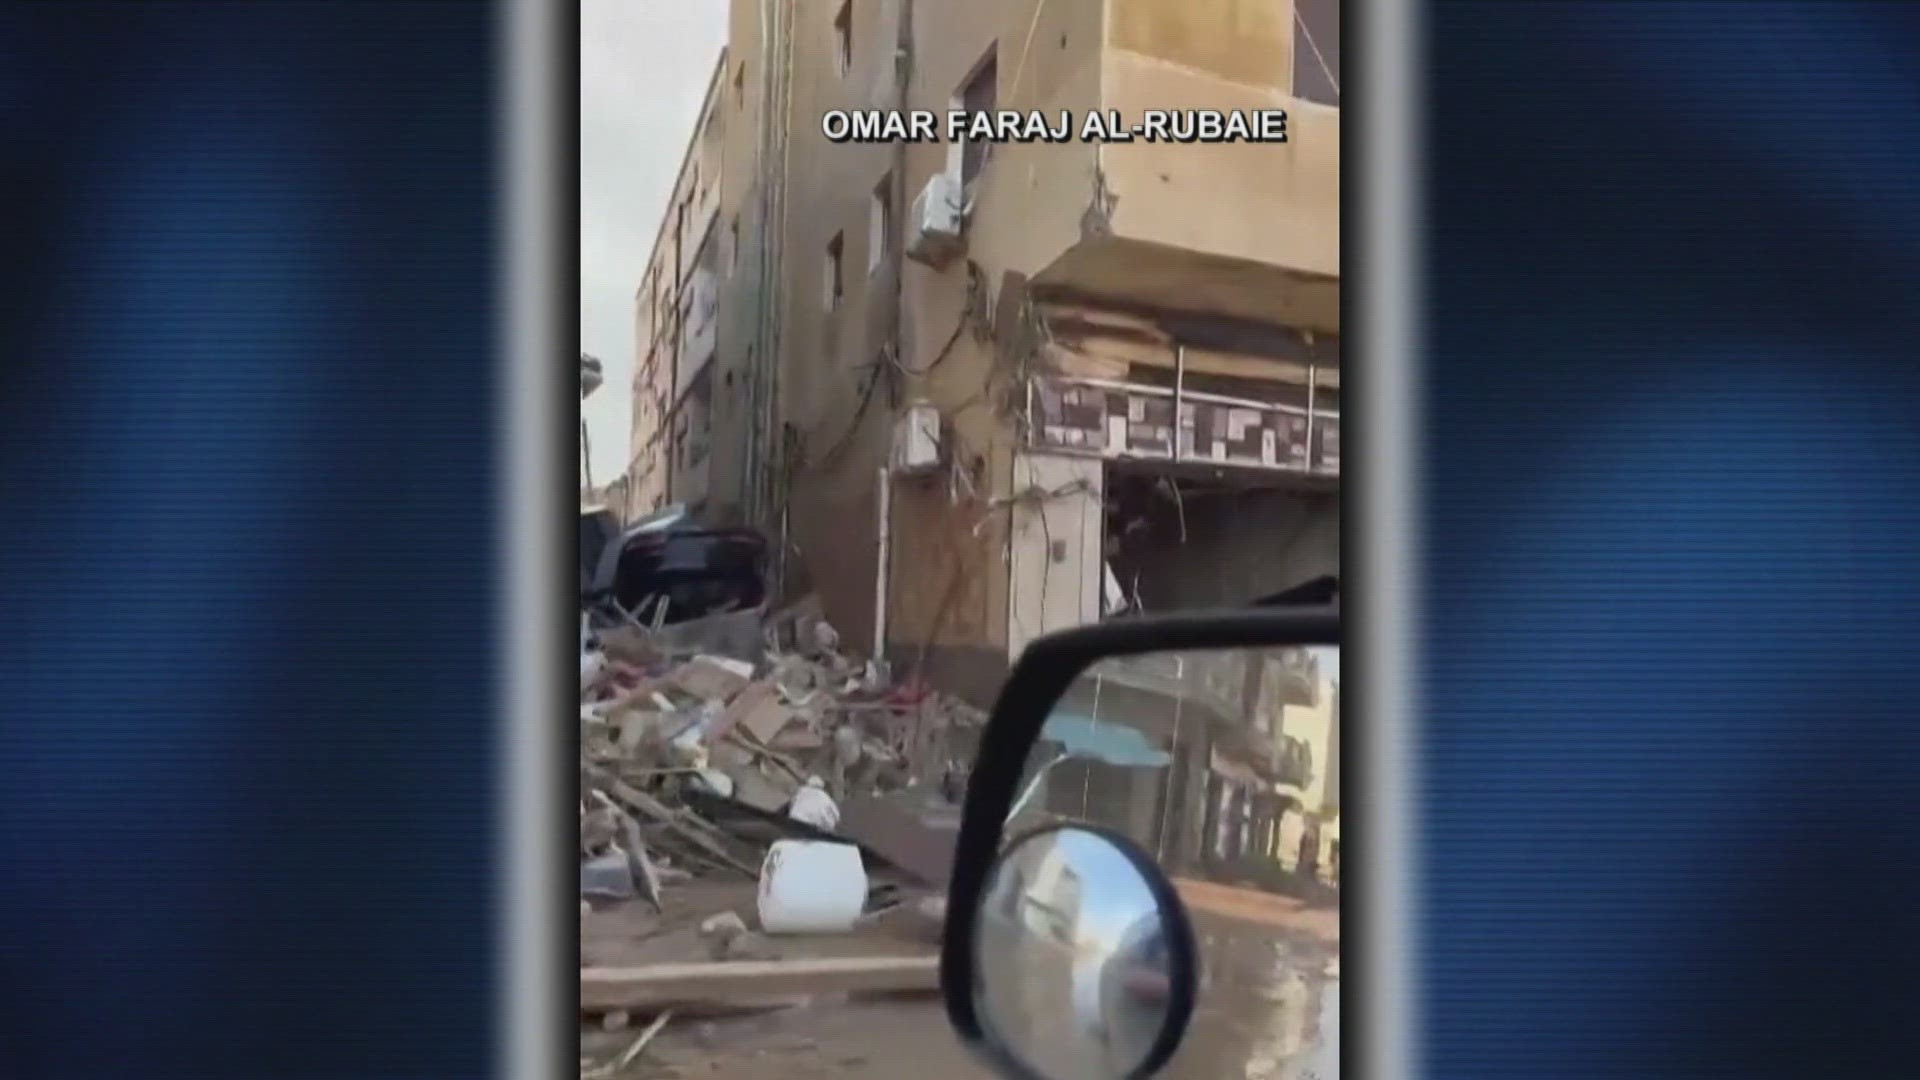 The worst hit in Libya appears to be the city of Derna, where local officials say a quarter of the city was wiped out.